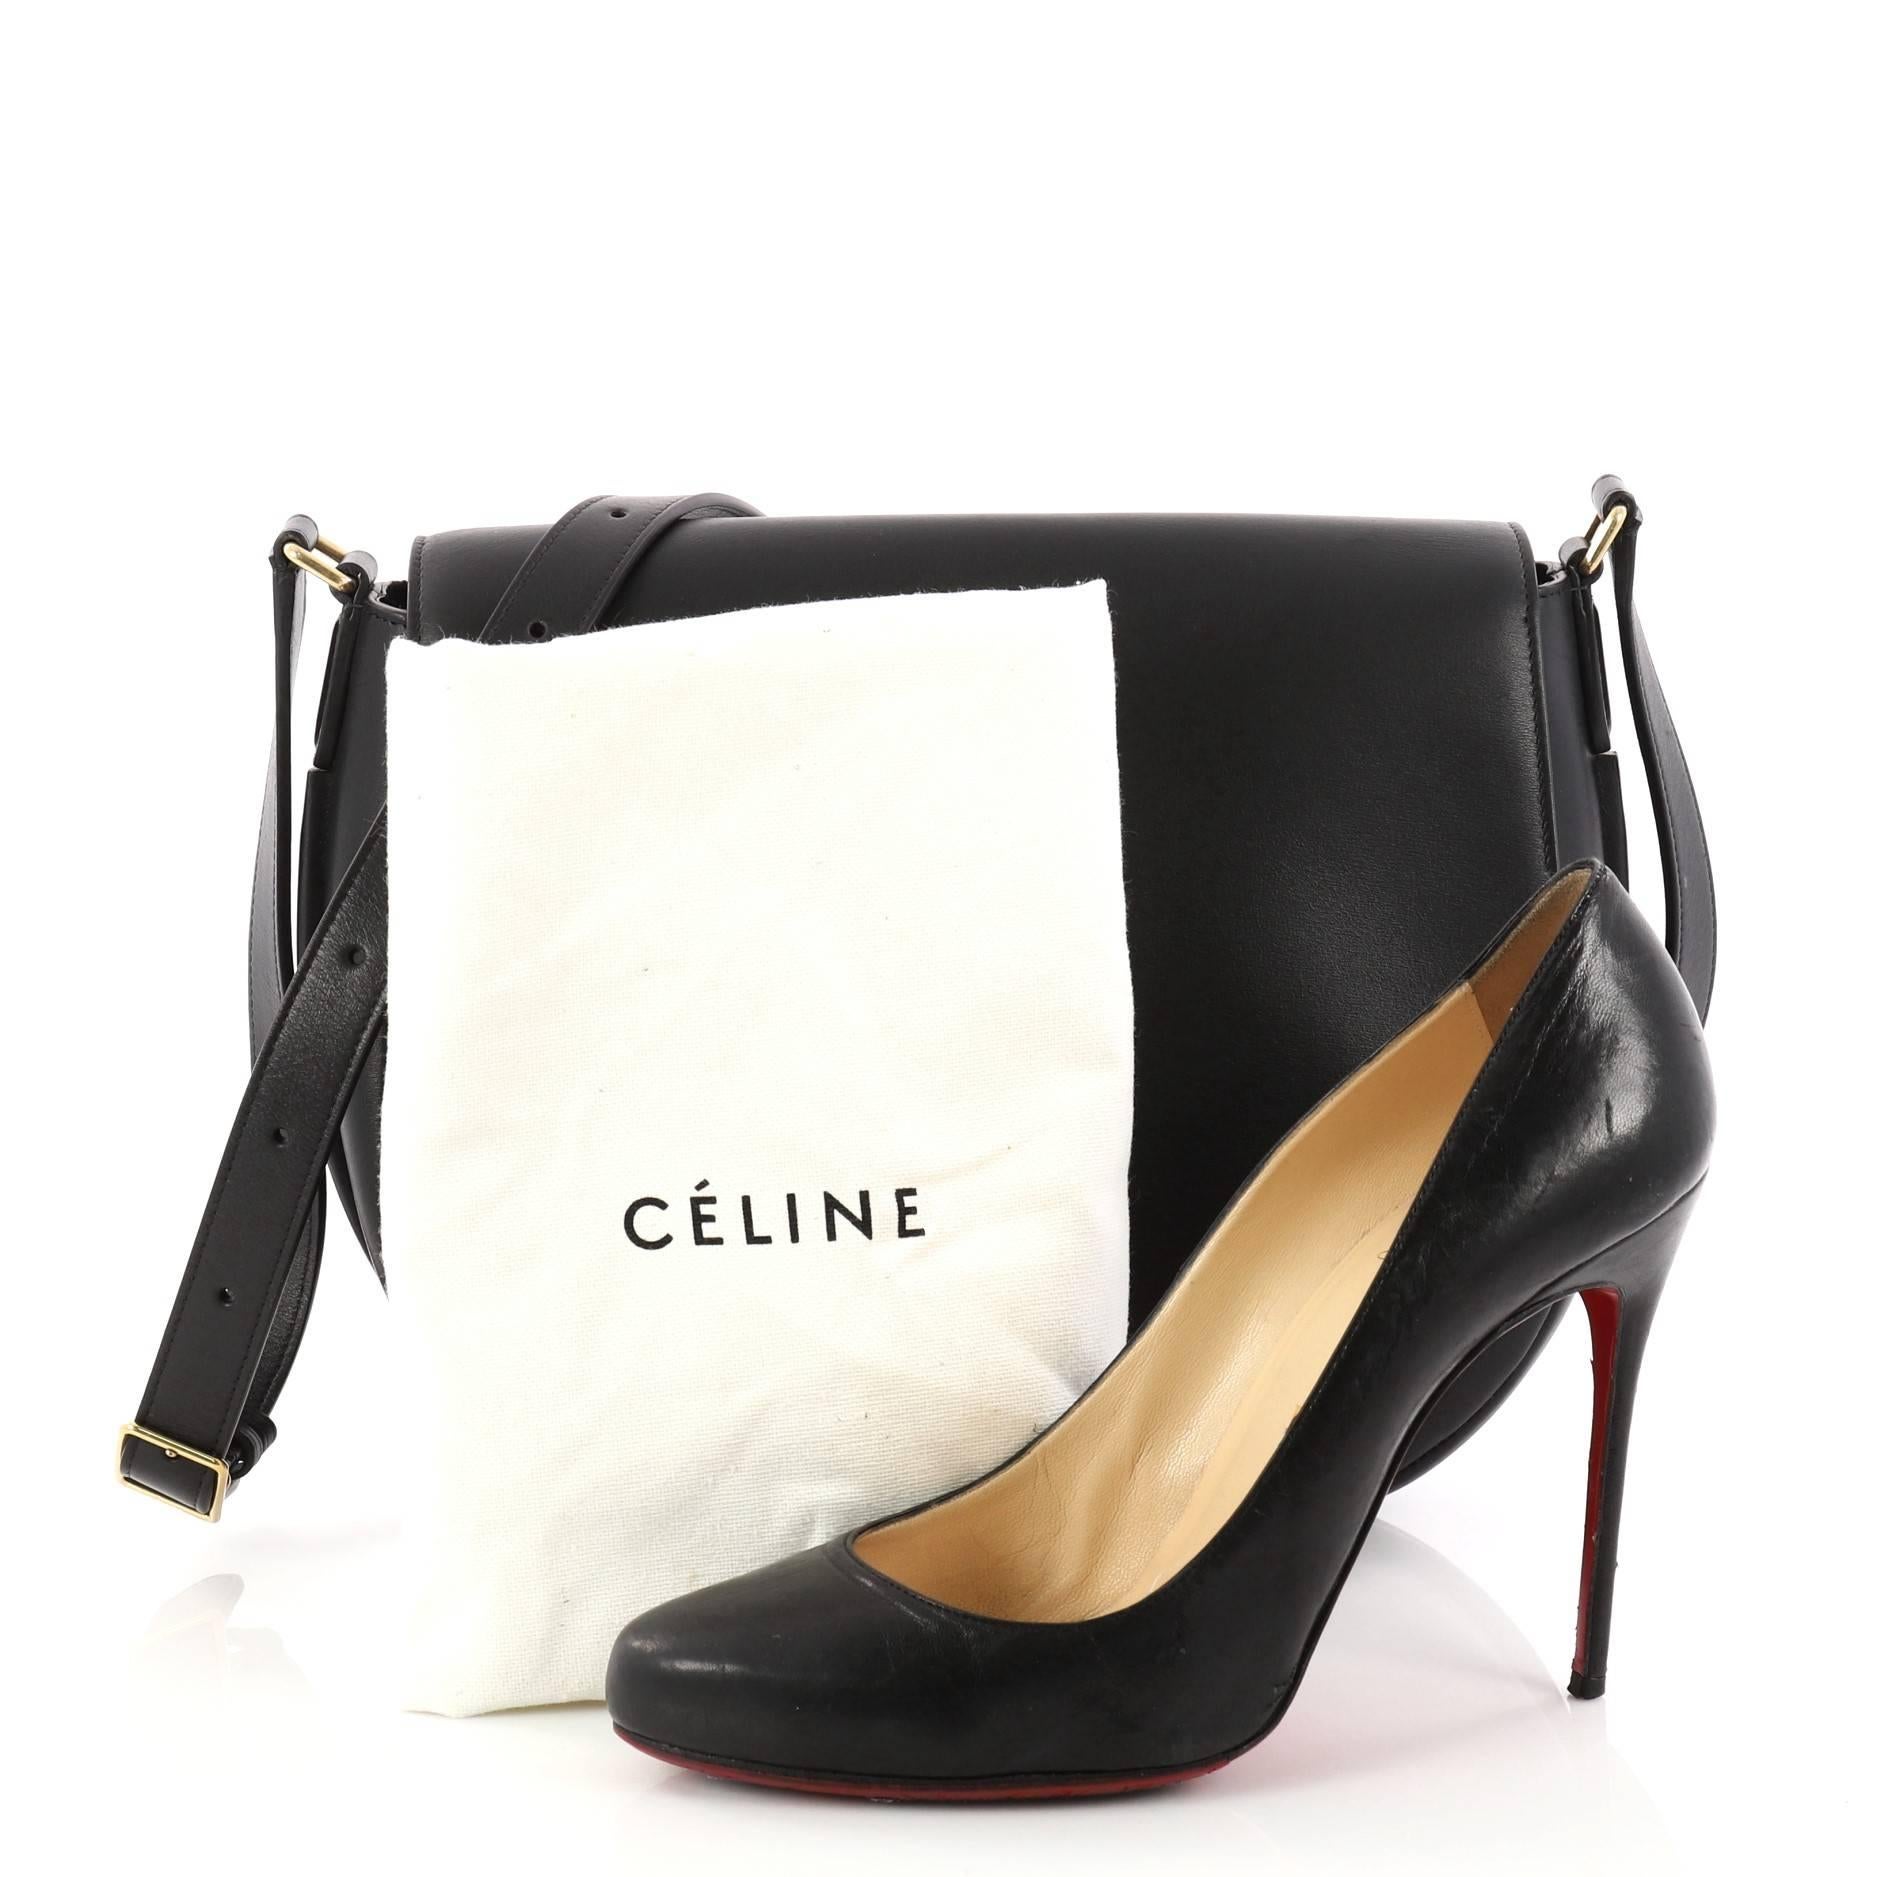 This authentic Celine Trotteur Messenger Bag Calfskin Medium in minimalist yet elegant design is perfect for on-the-go fashionistas. Crafted in beautiful black calfskin leather, this saddle-inspired bag features adjustable belted leather strap,